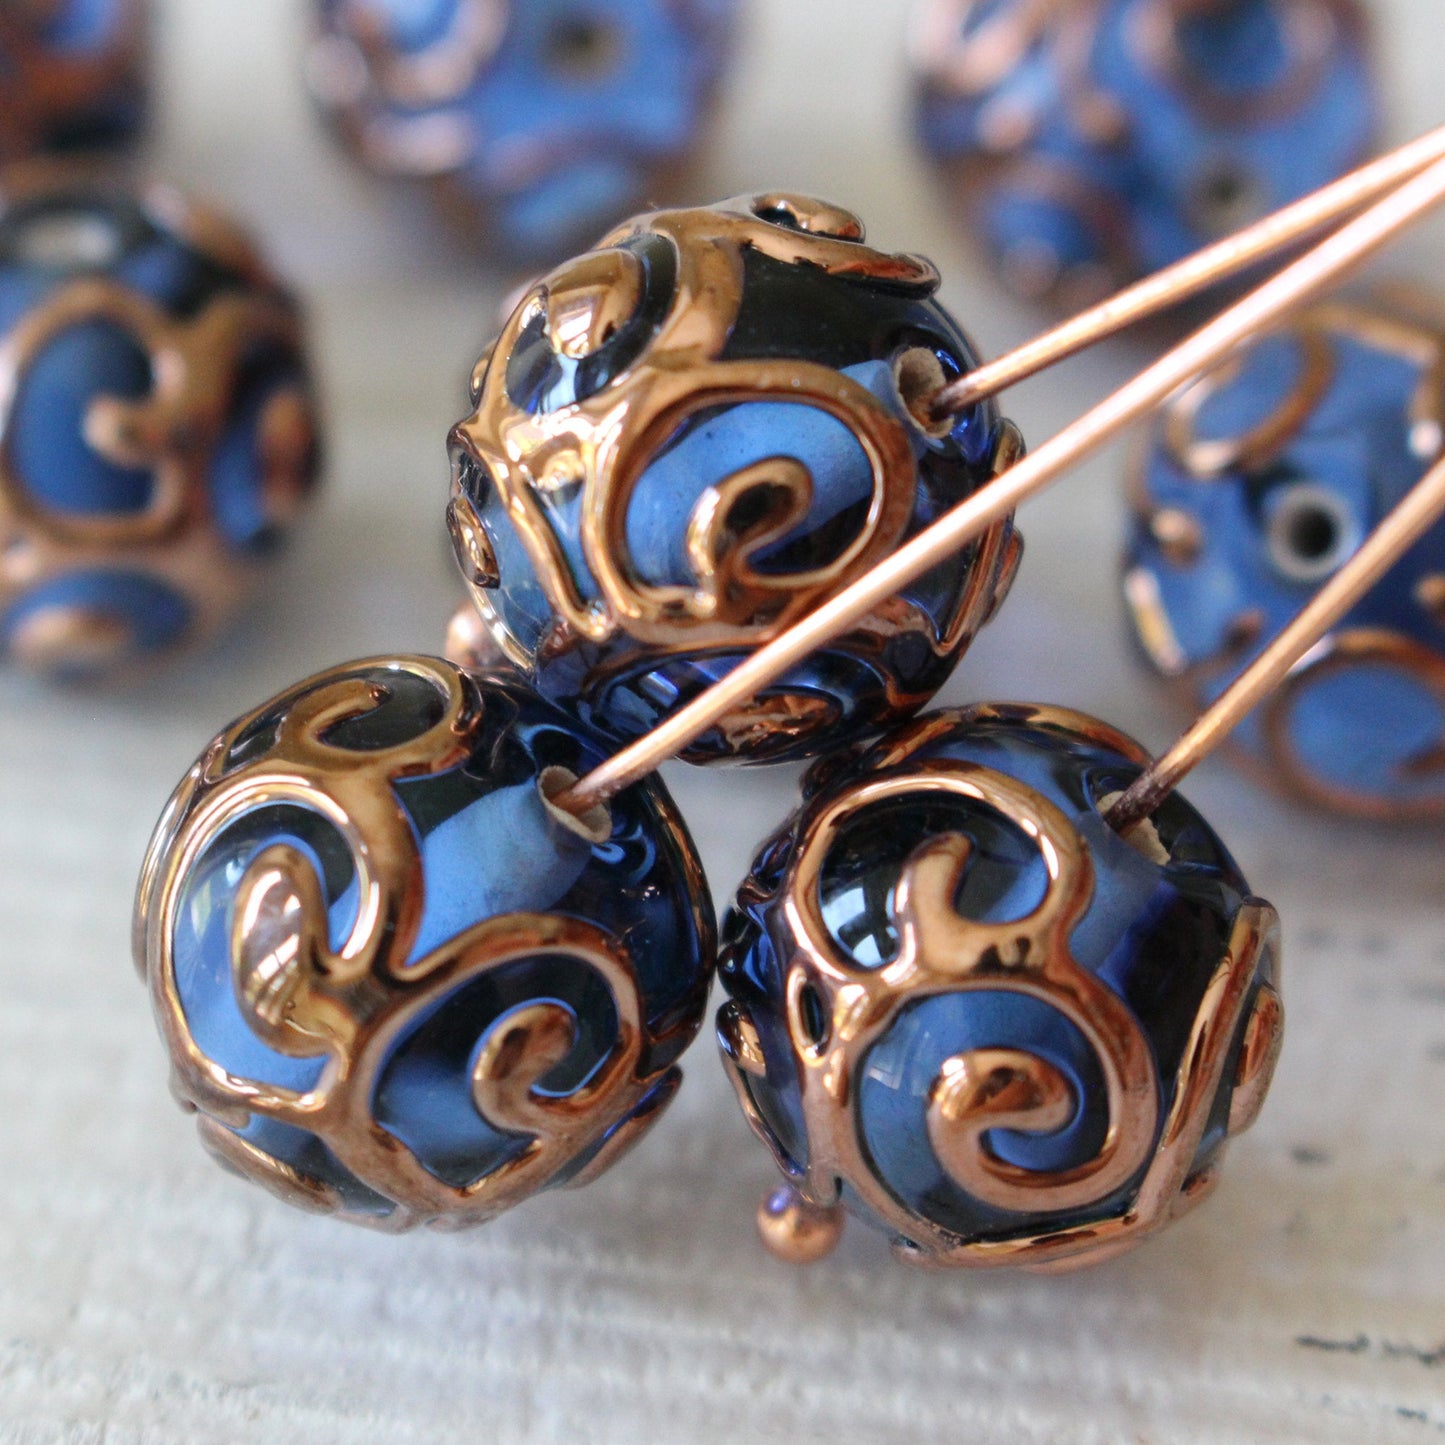 12mm Round Lampwork Beads - Sapphire Blue - 2, 4 or 8